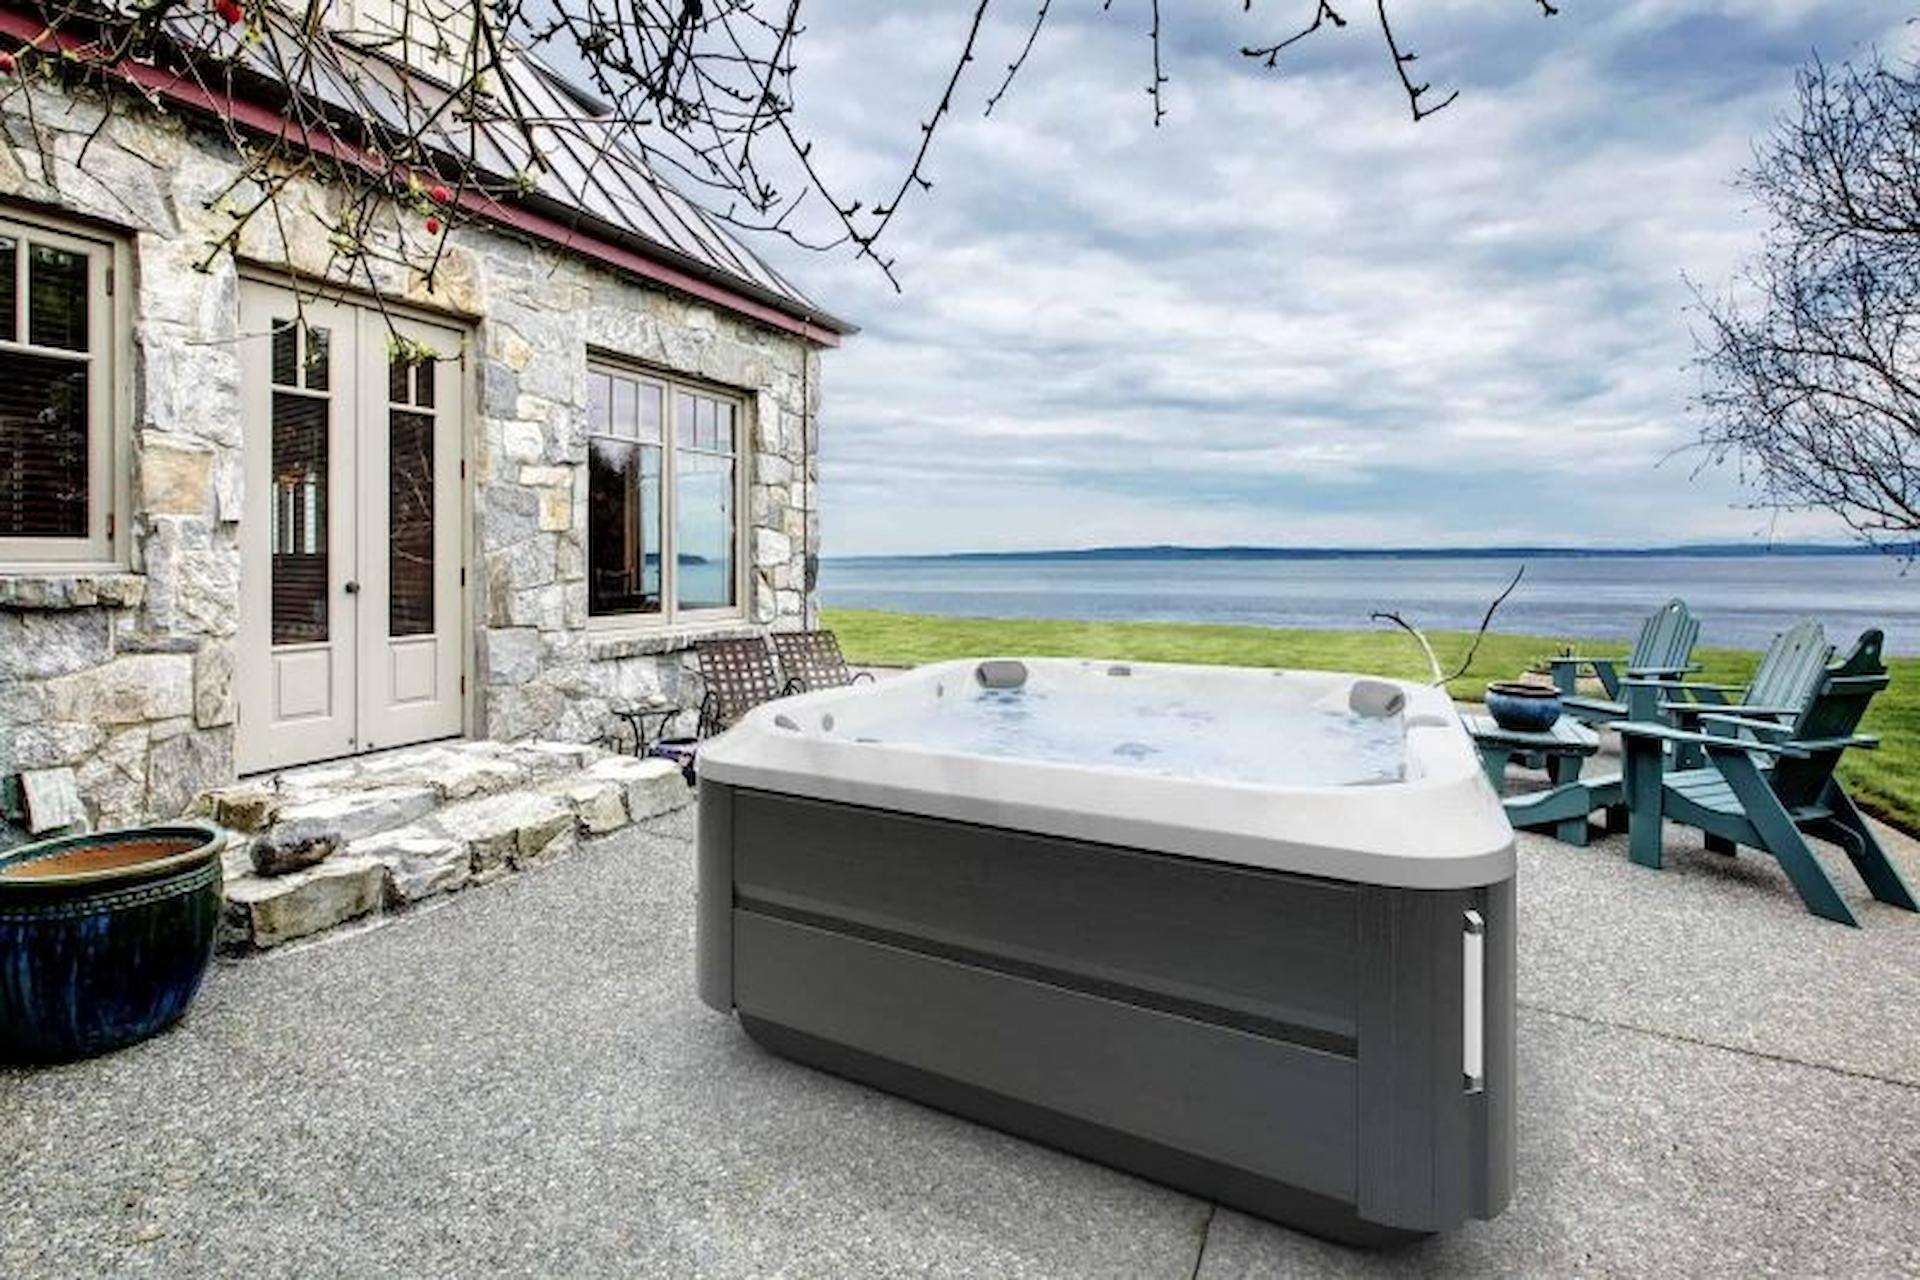 How Buying A Hot Tub Can Enhance Your Lifestyle?